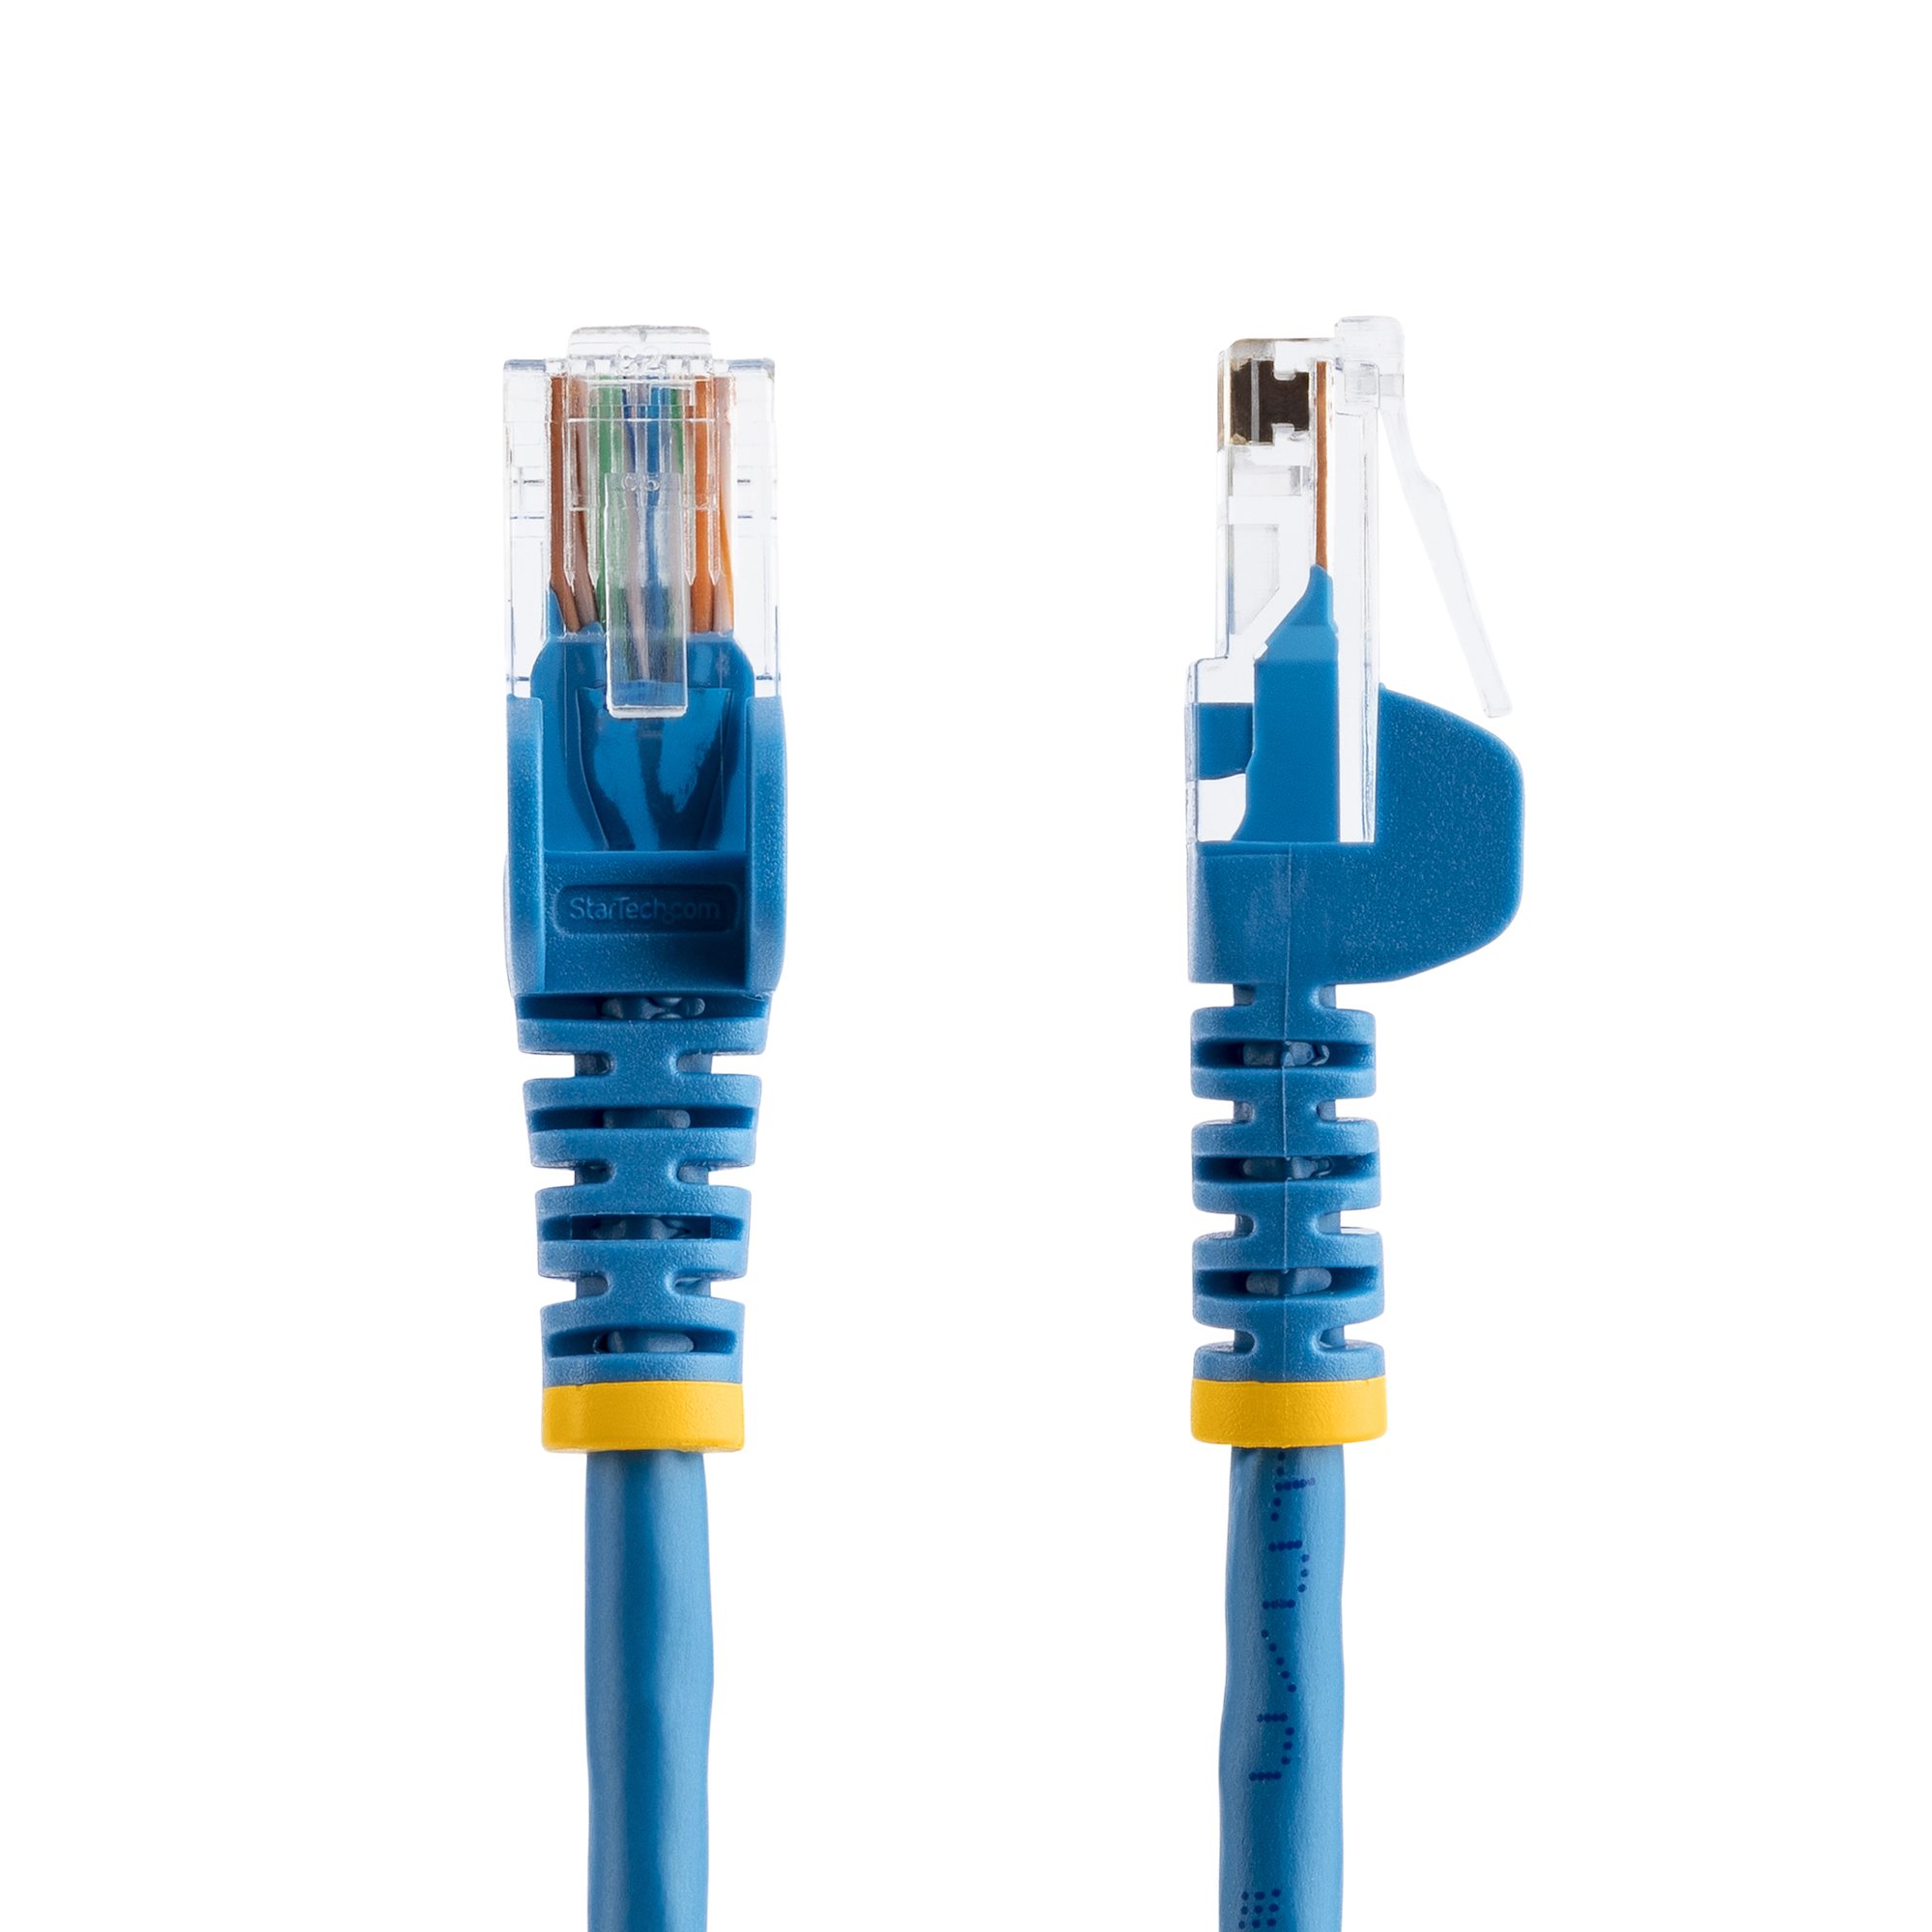 Cat5e Patch Cable with Snagless RJ45 Connectors - 25 ft, Blue